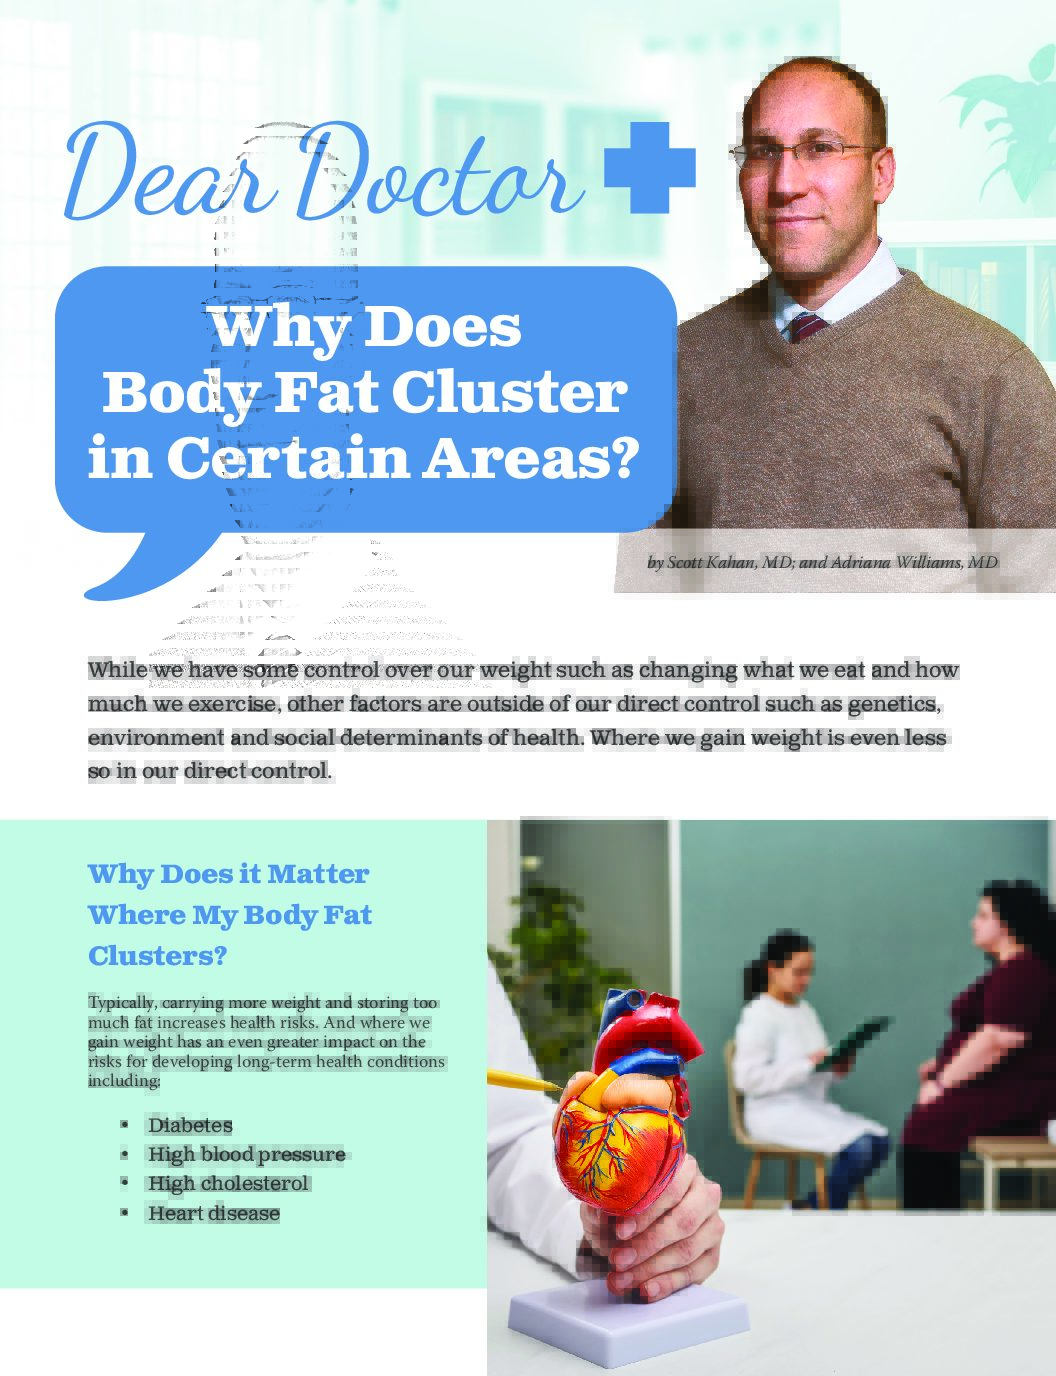 Dear Doctor: Why Does Body Fat Cluster in Certain Areas? - Obesity Action  Coalition